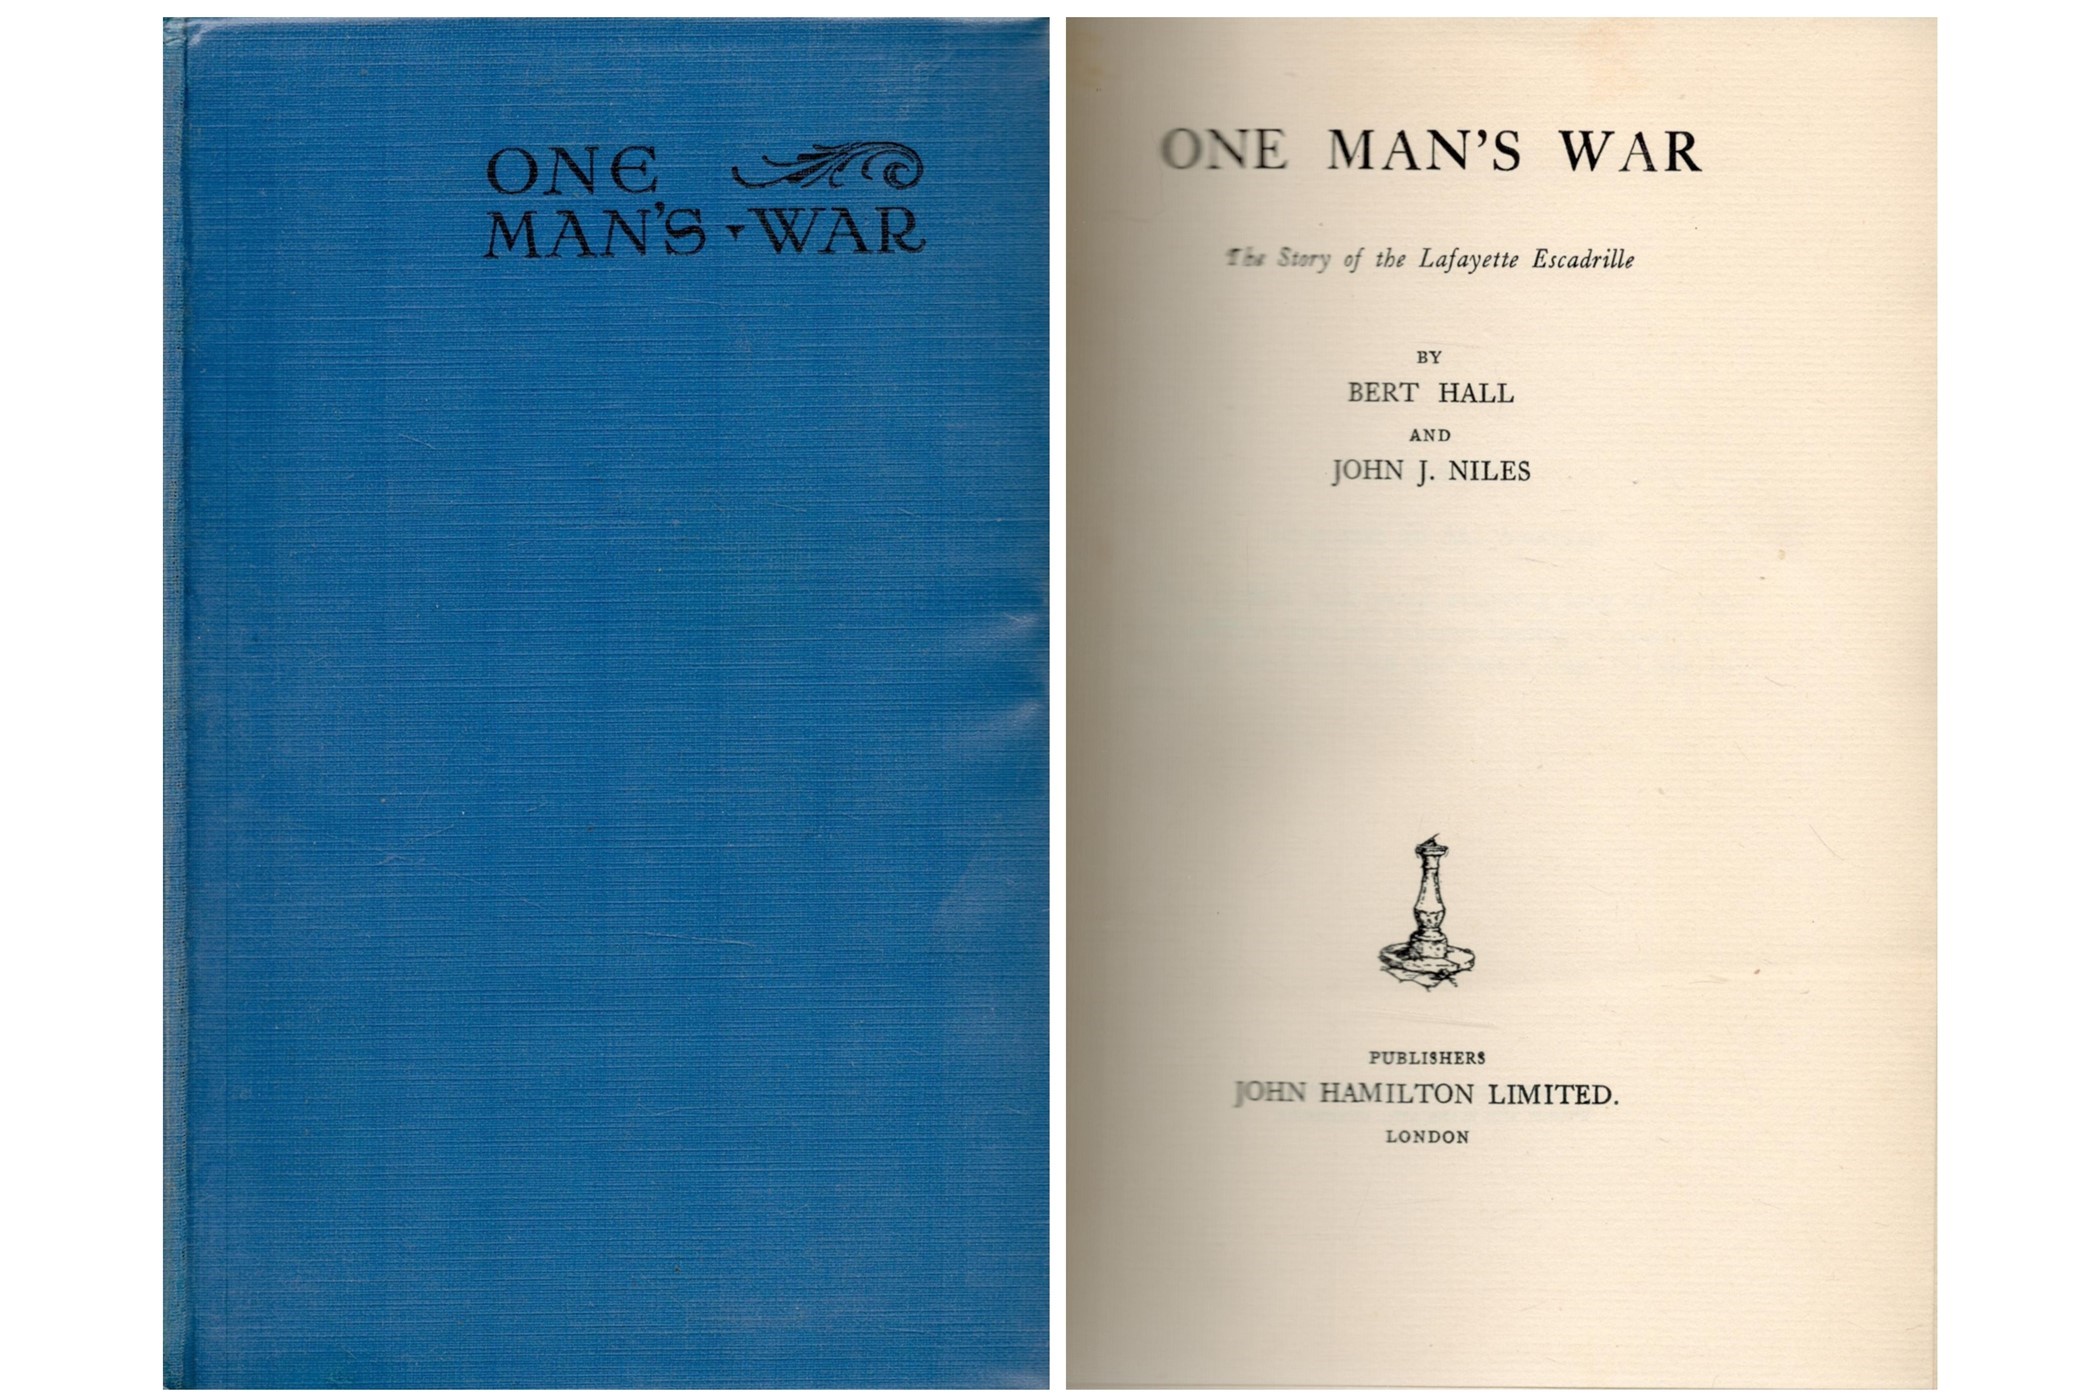 One Man's War The Story of Lafayette Escadrille by Bert Hall and John J Niles date and edition